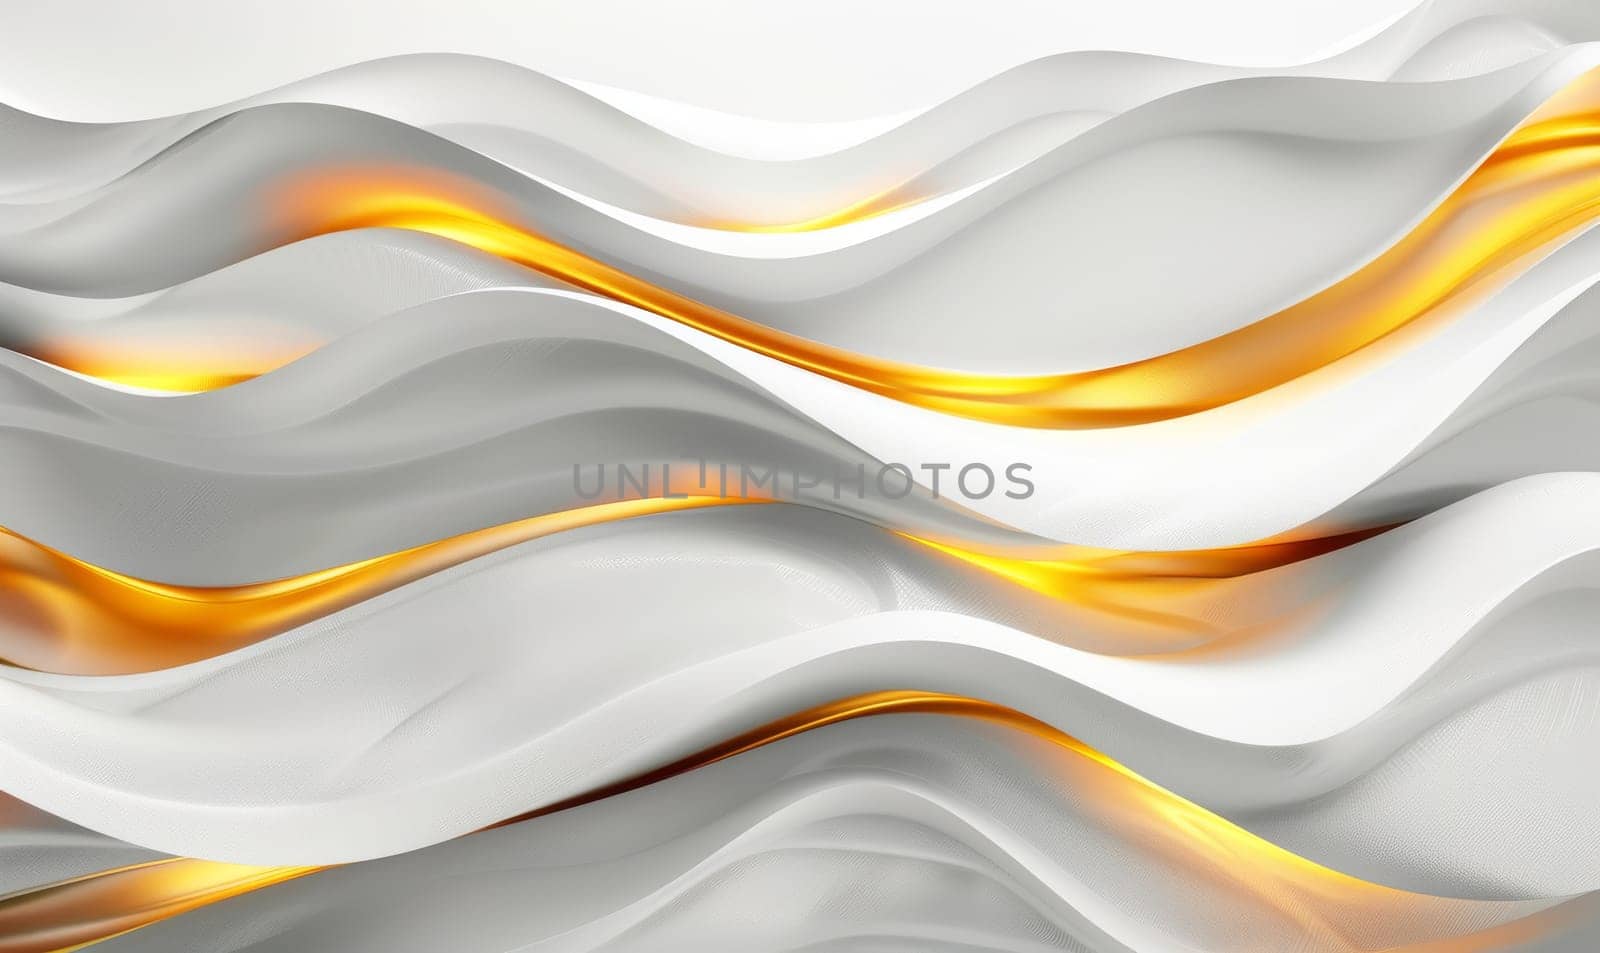 A white and gold wave pattern with a yellow stripe. The wave pattern is very smooth and has a shiny, reflective quality, illustrator background